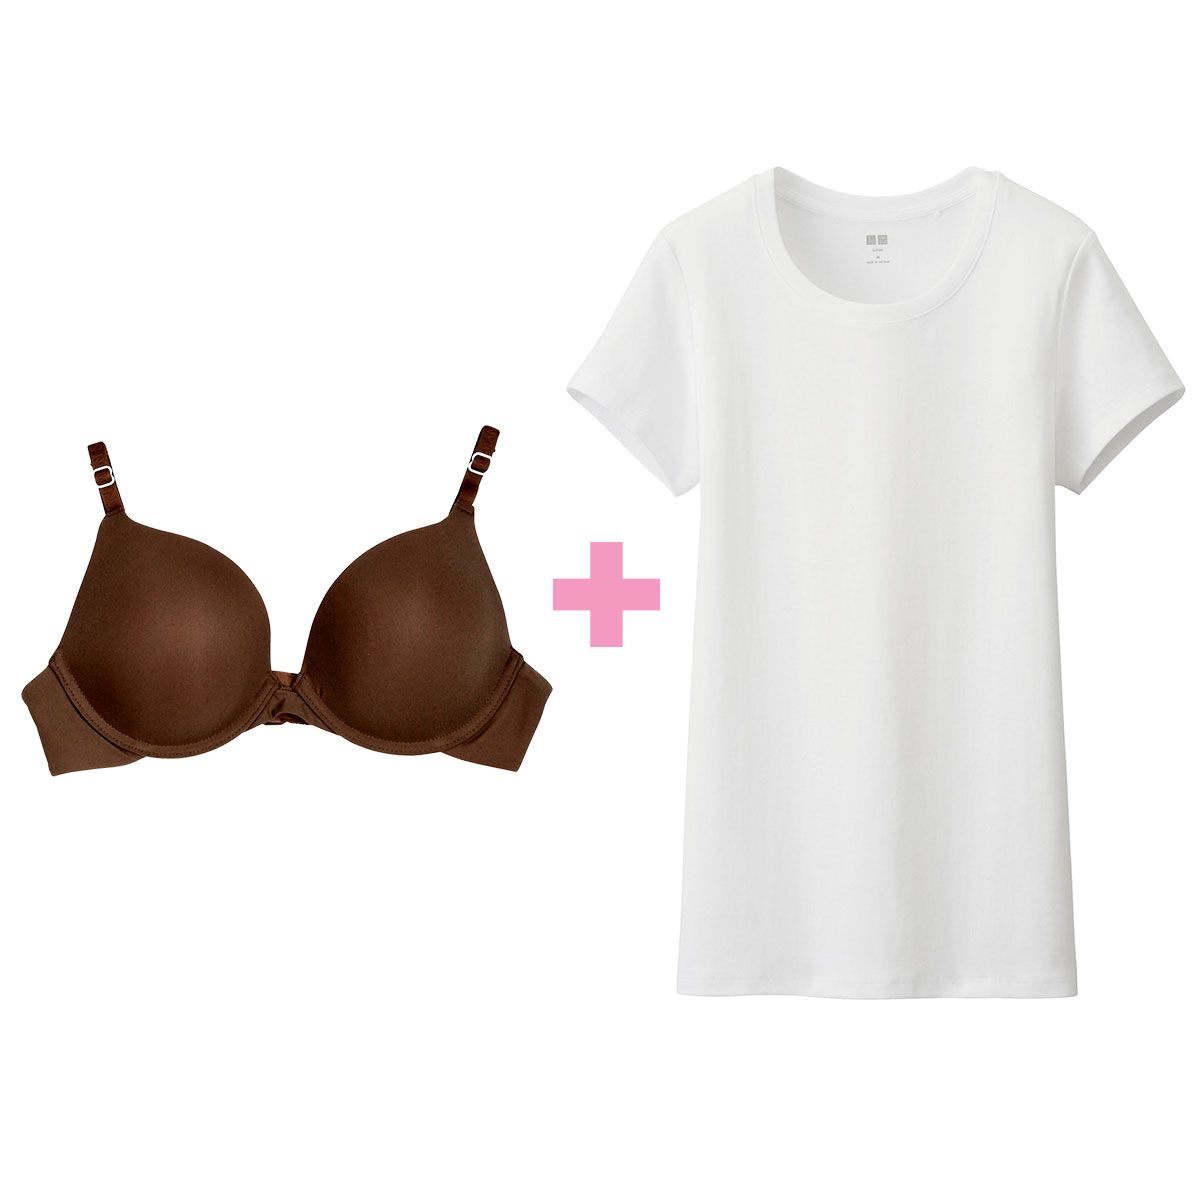 See What Color Bra to Wear Under a White Shirt